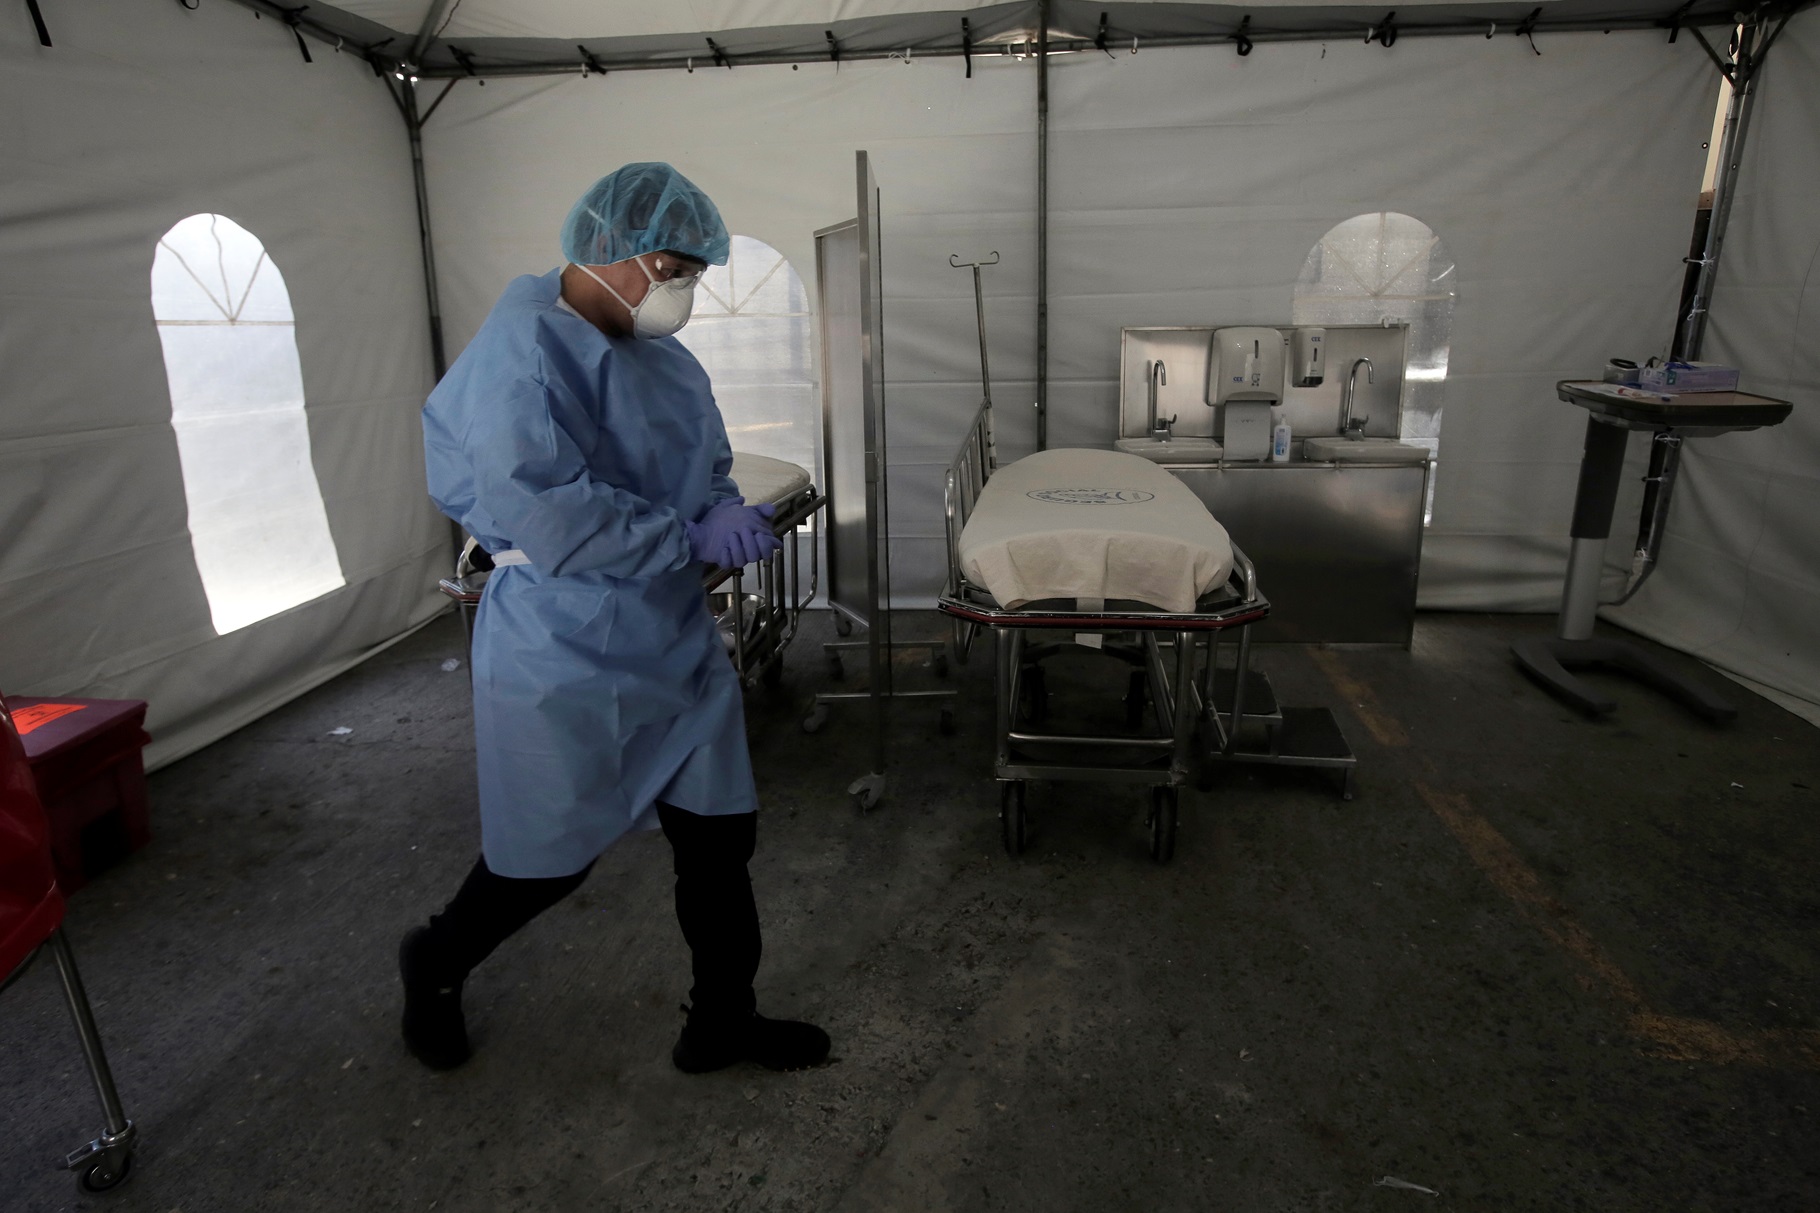 A member of the medical personnel wearing a protective face mask is seen at a tent triage prepared for suspected COVID-19 patients in San José, Costa Rica, March 13, 2020.